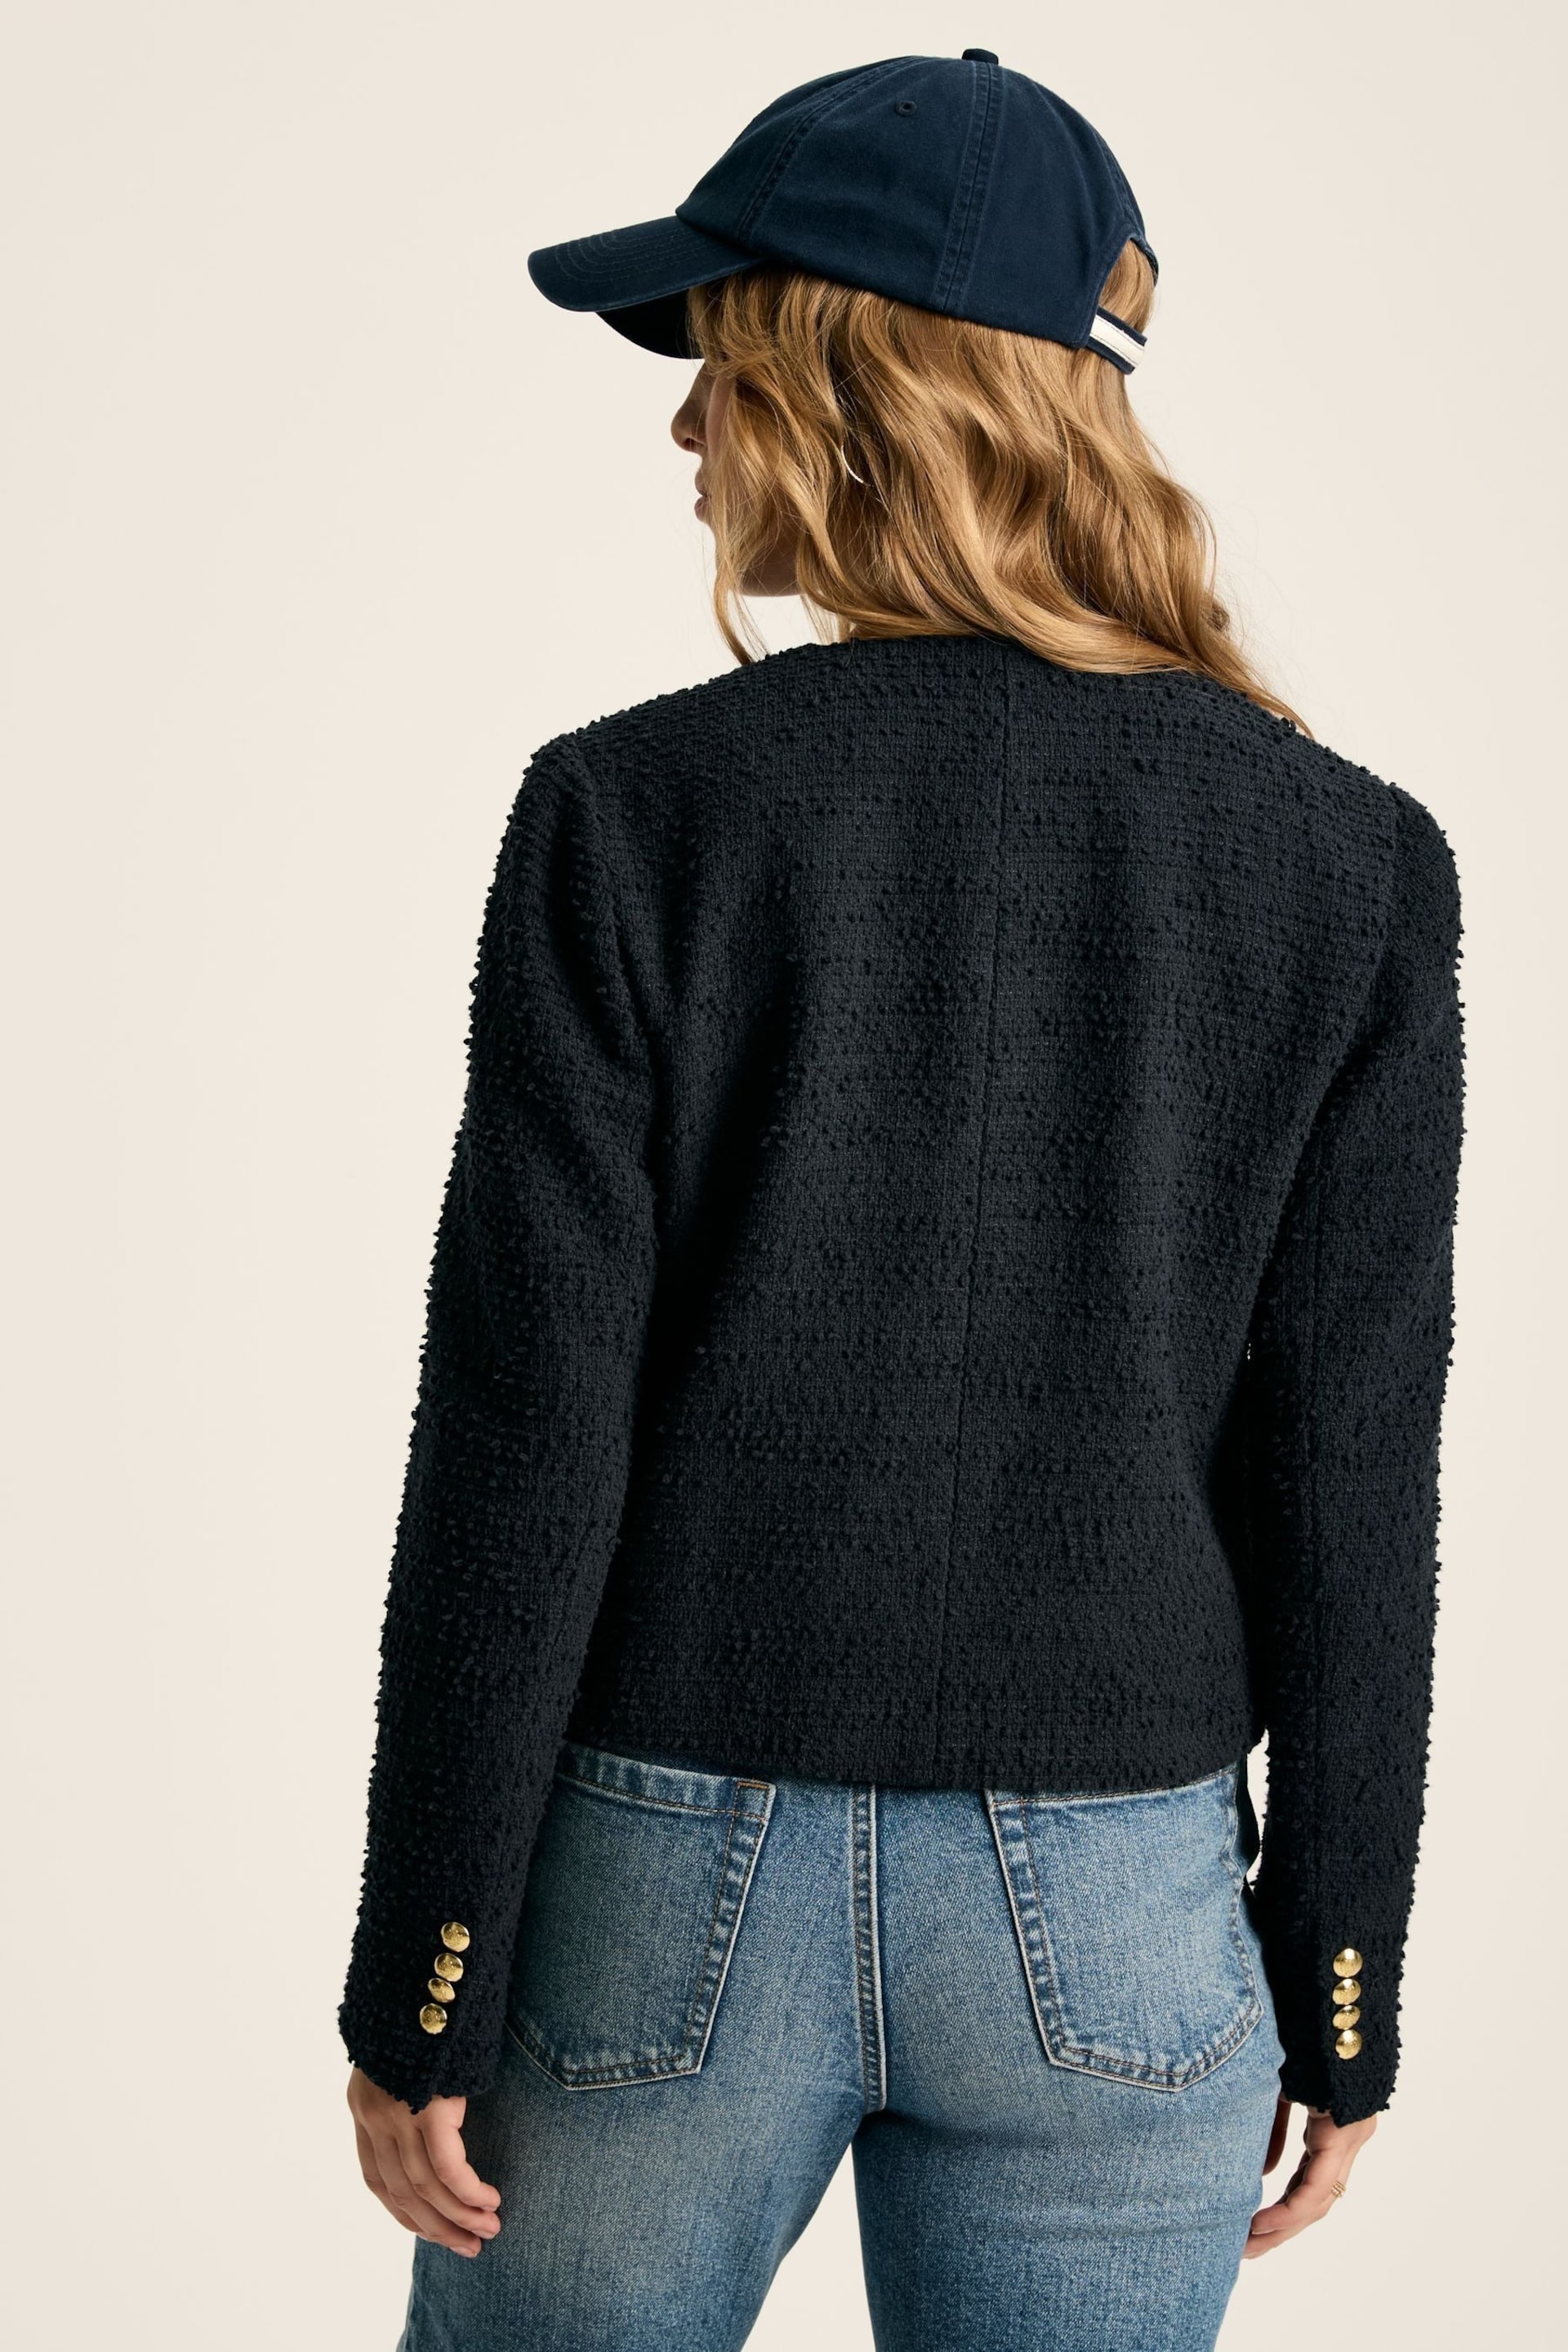 Joules Hampstead Navy Boucle Jacket - Image 4 of 8